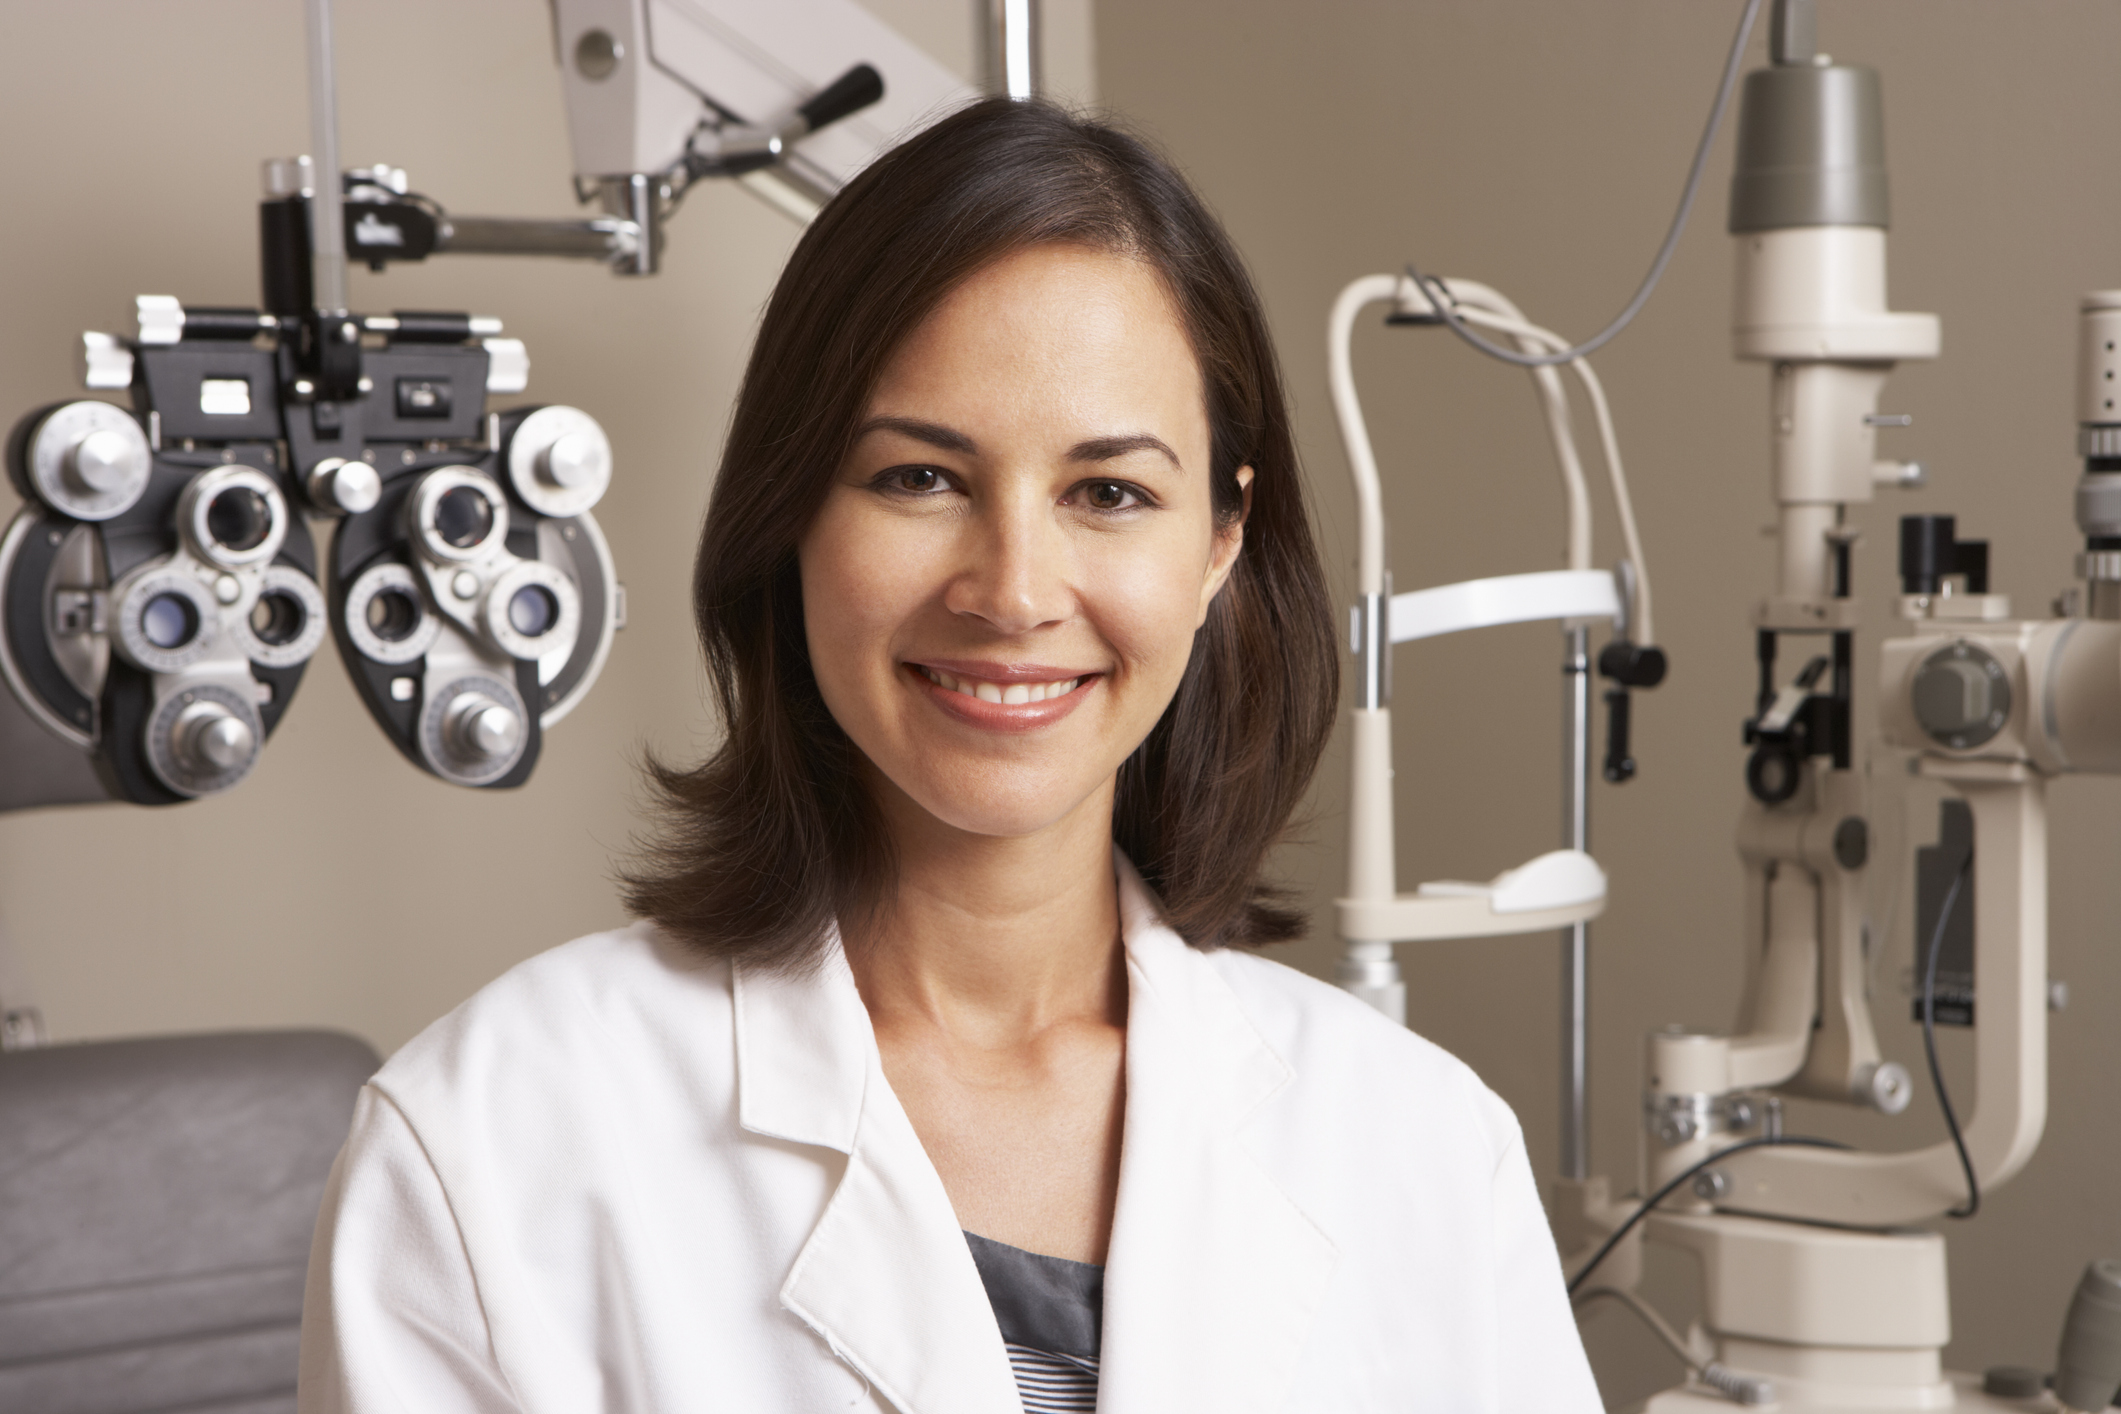 A young female optician in surgery smiling. Varying types of optical equipment fill the background behind the woman eye doctor. She has brunette hair and is wearing a white doctor's coat. The woman is in sharp focus while the background behind her is intentionally blurred.